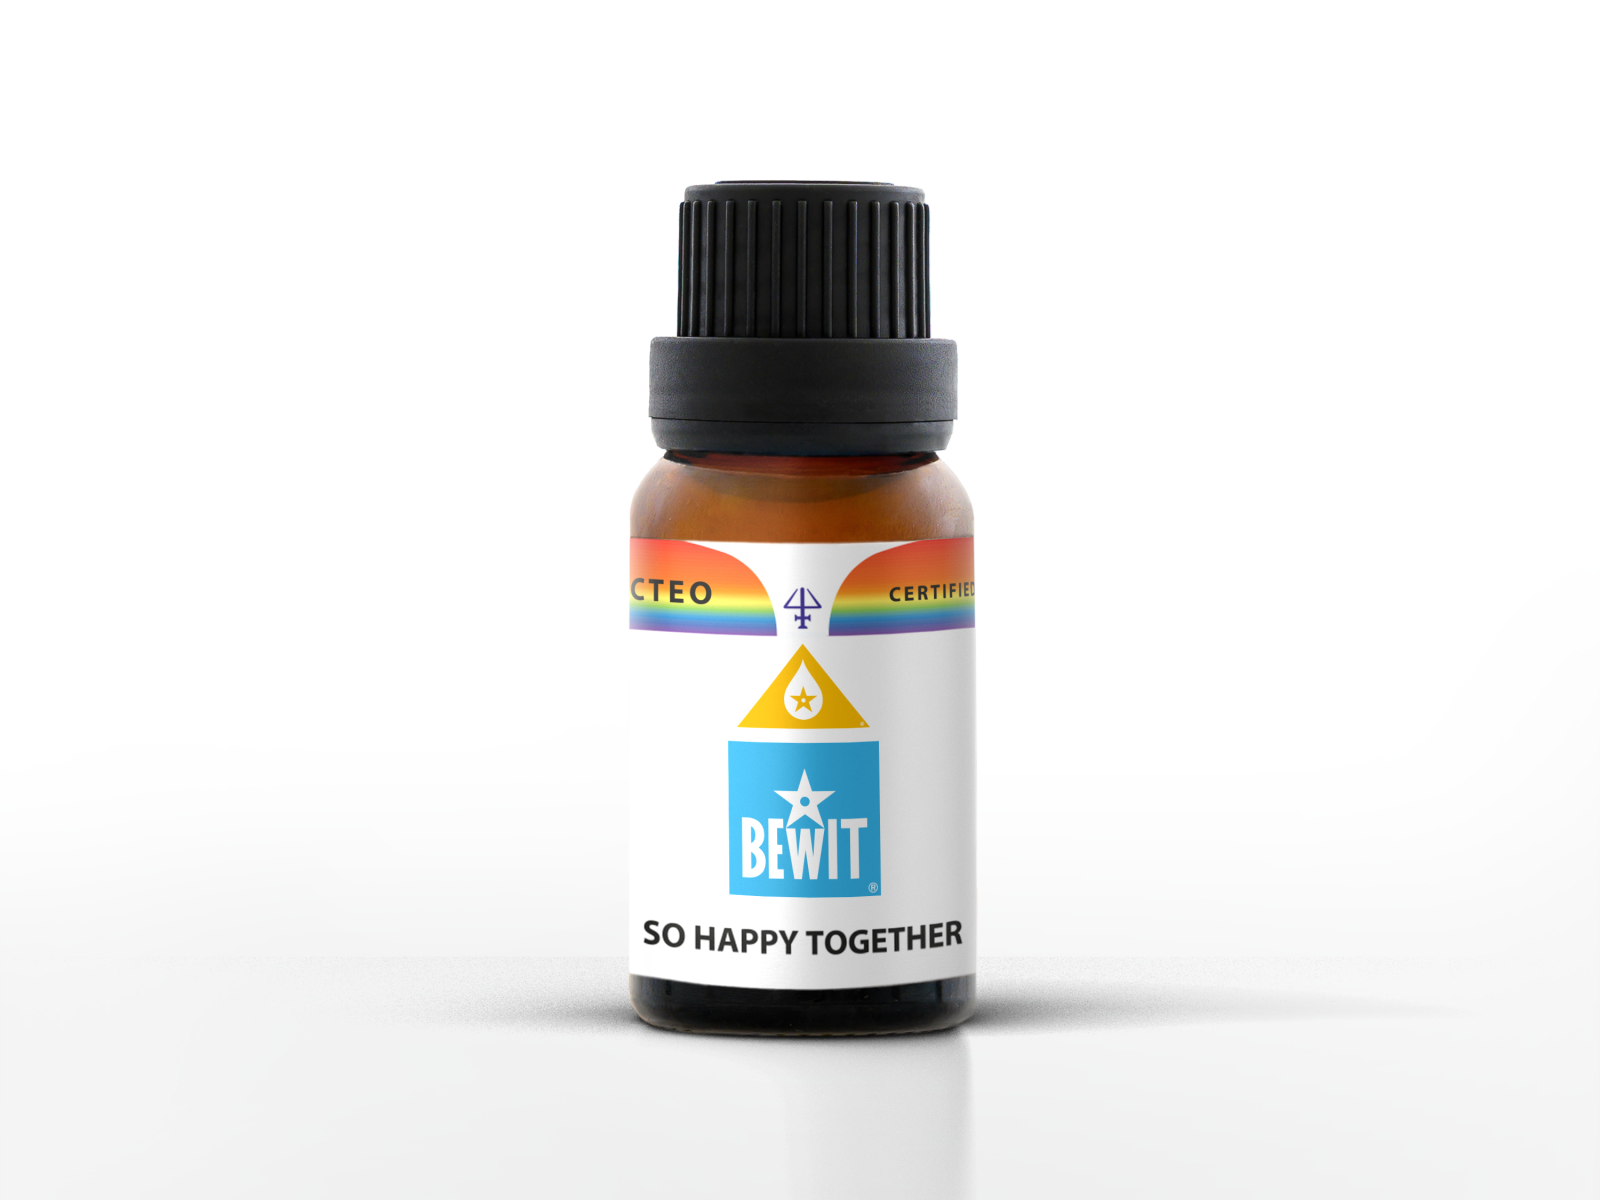 BEWIT SO HAPPY TOGETHER - Blend of essential oils - 1